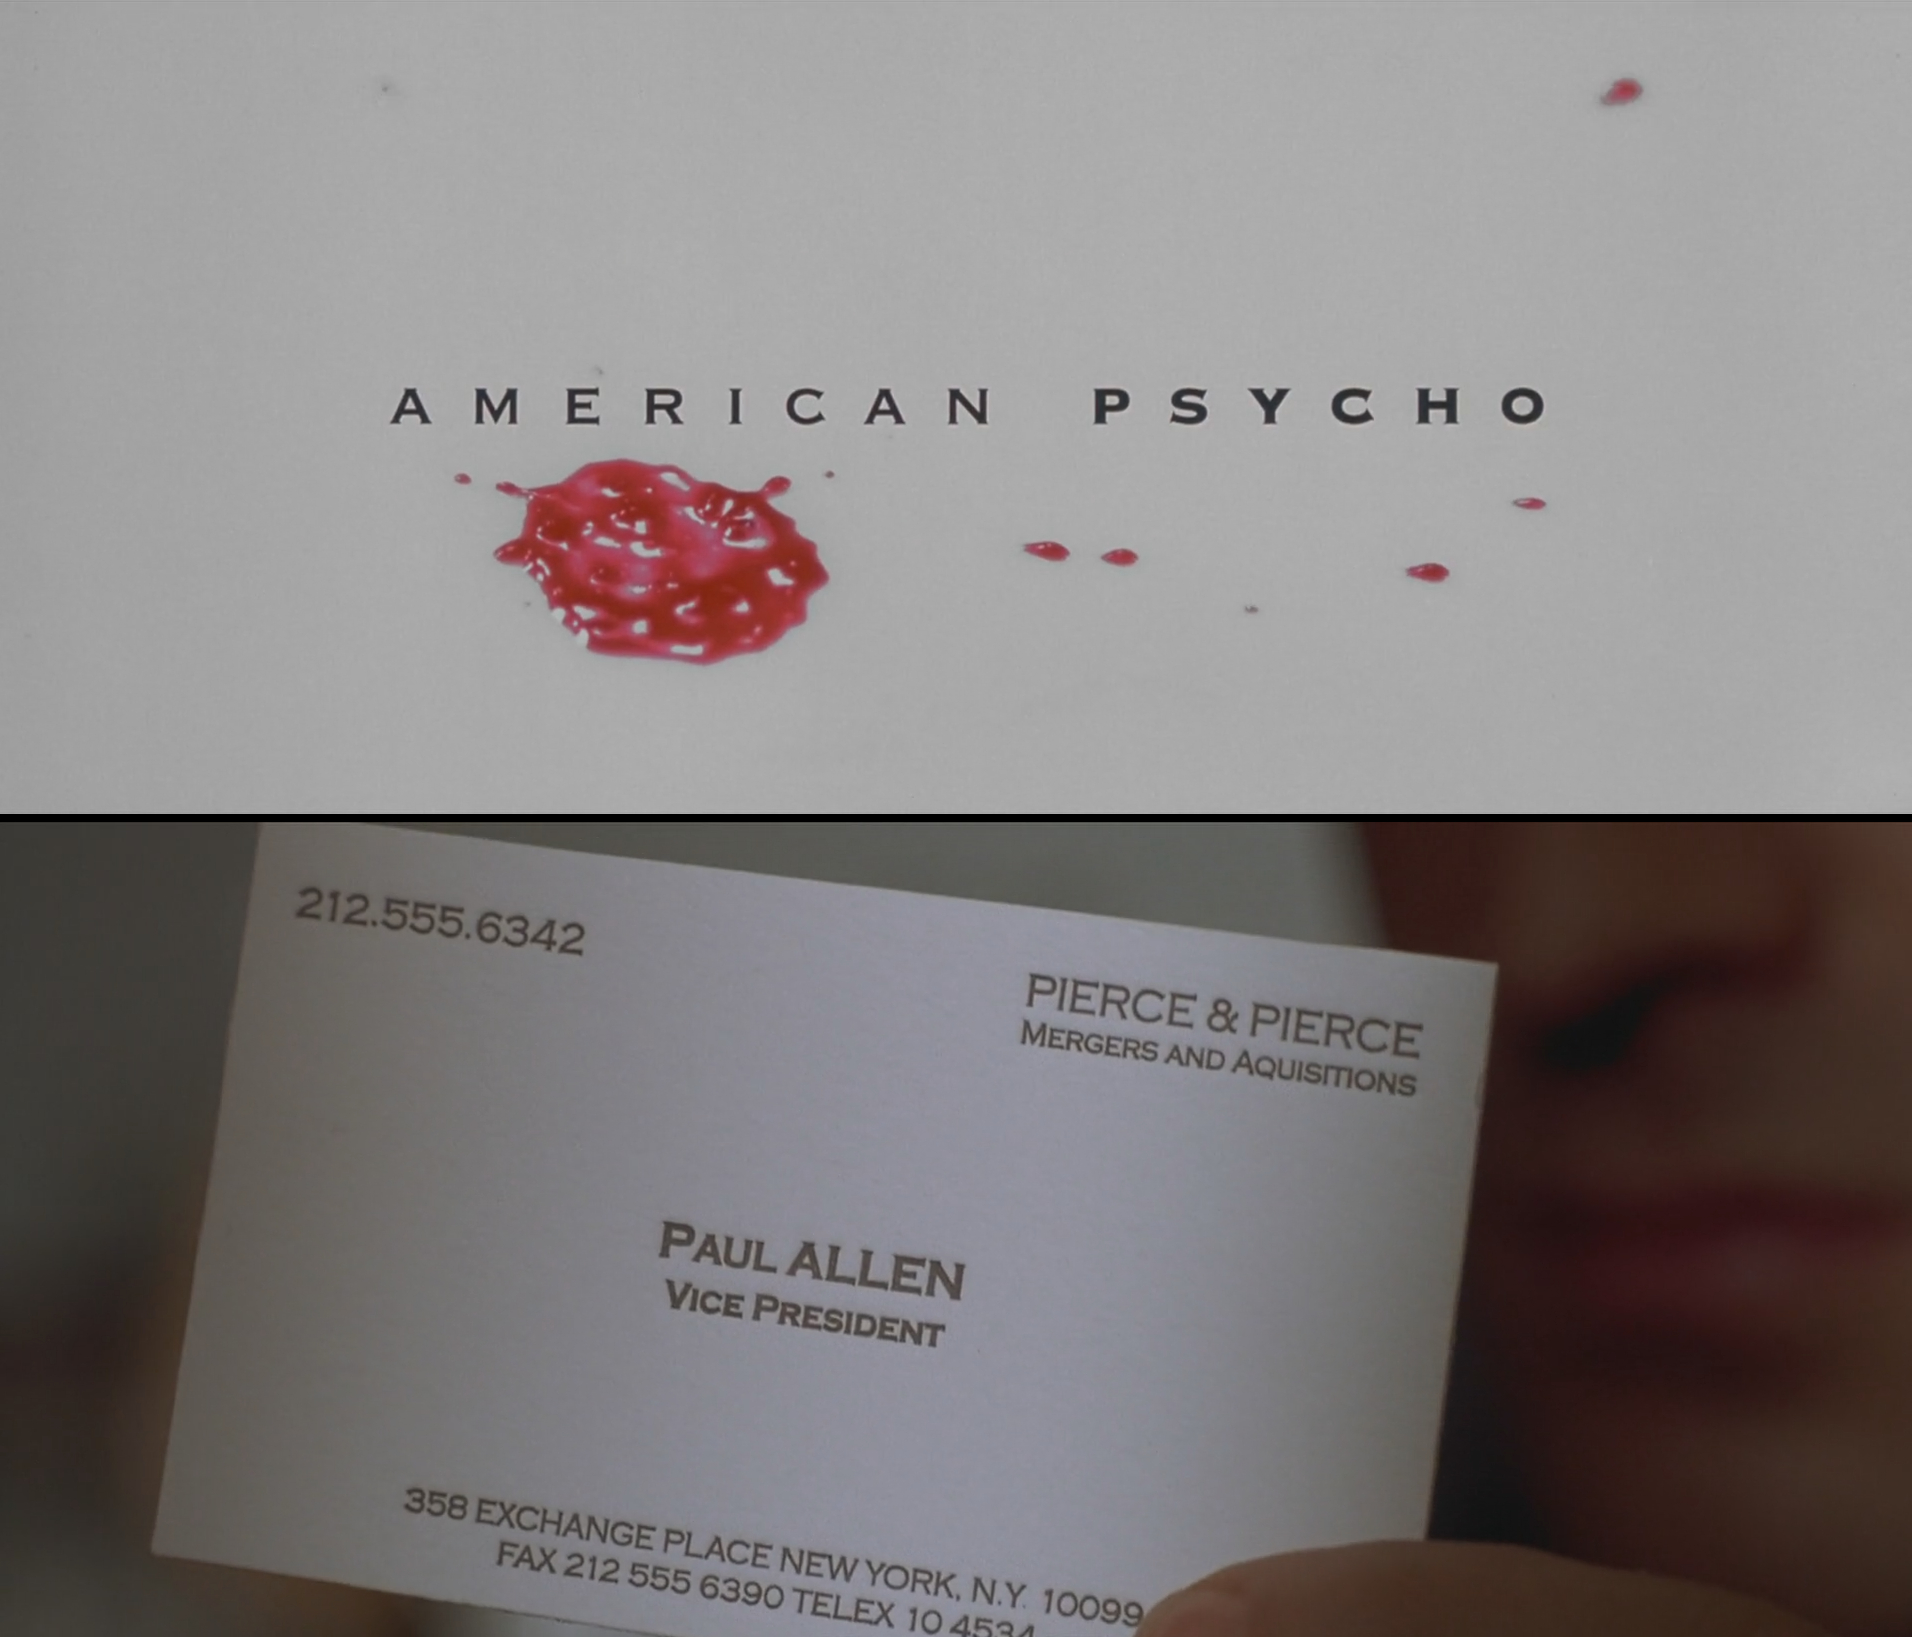 American Psycho Quotes Business Card Cards | Pozycjoner Intended For Paul Allen Business Card Template